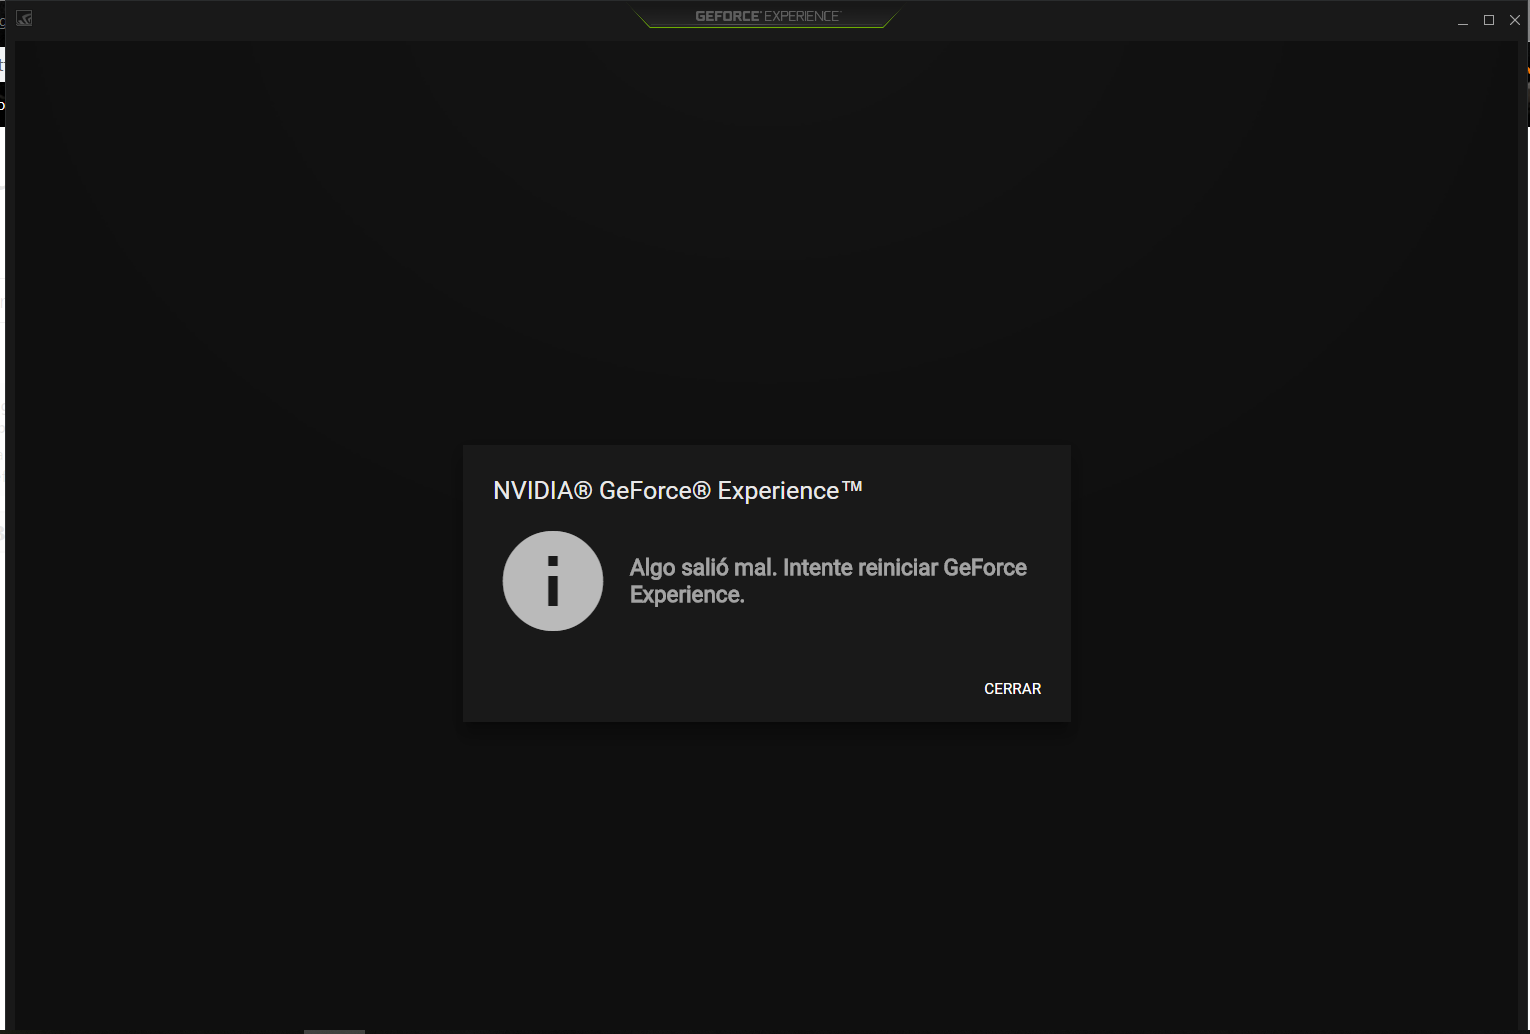 Error con nvidia geforce 940mx  con GeForce Experience ef44cfbb-8422-449d-ac38-15ac7a1429a2?upload=true.png